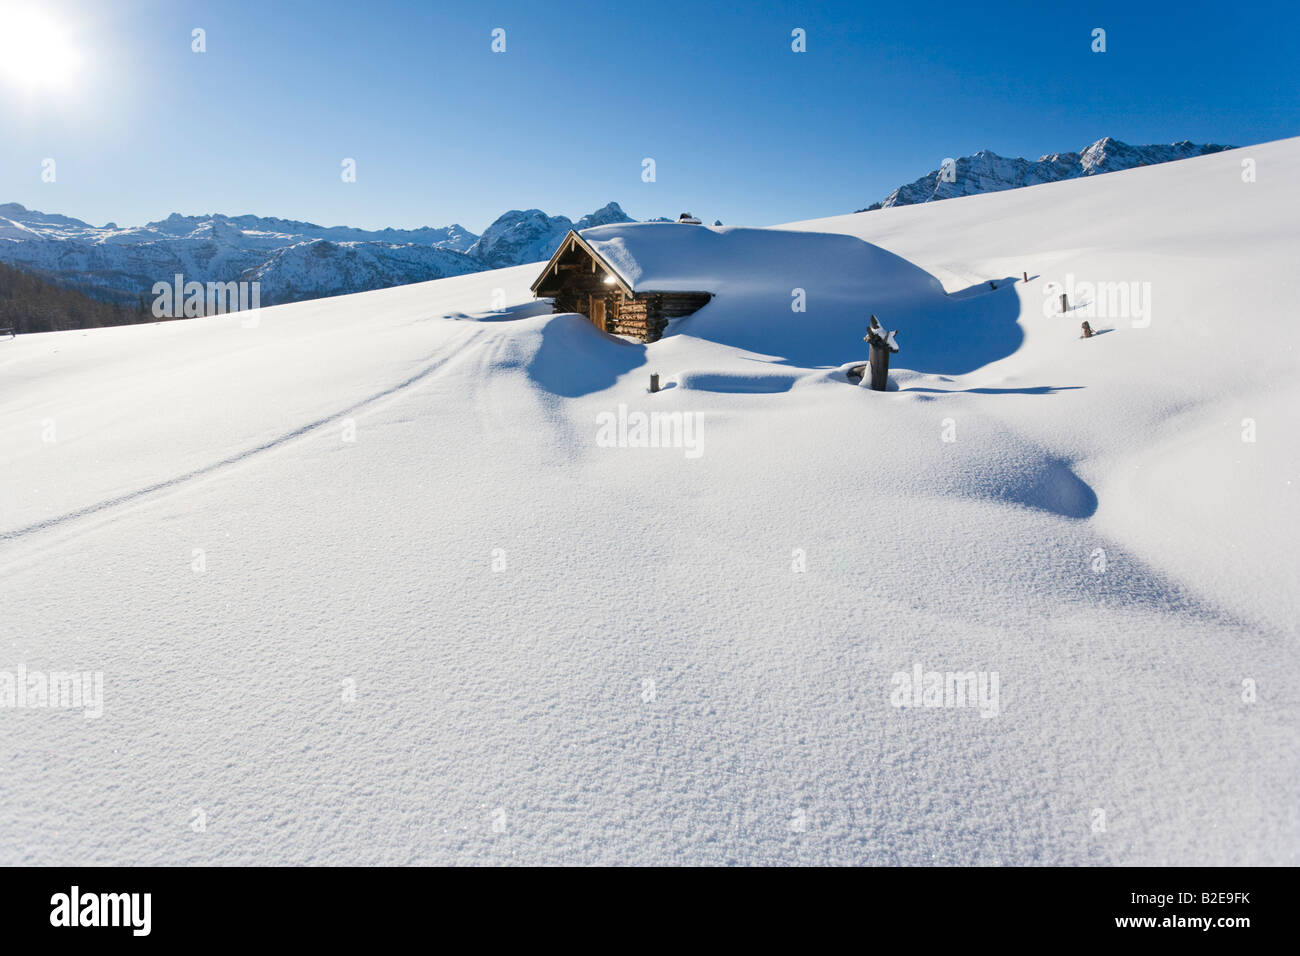 Log cabin covered with snow on polar landscape, Berchtesgaden Alps, Bavaria, Germany Stock Photo